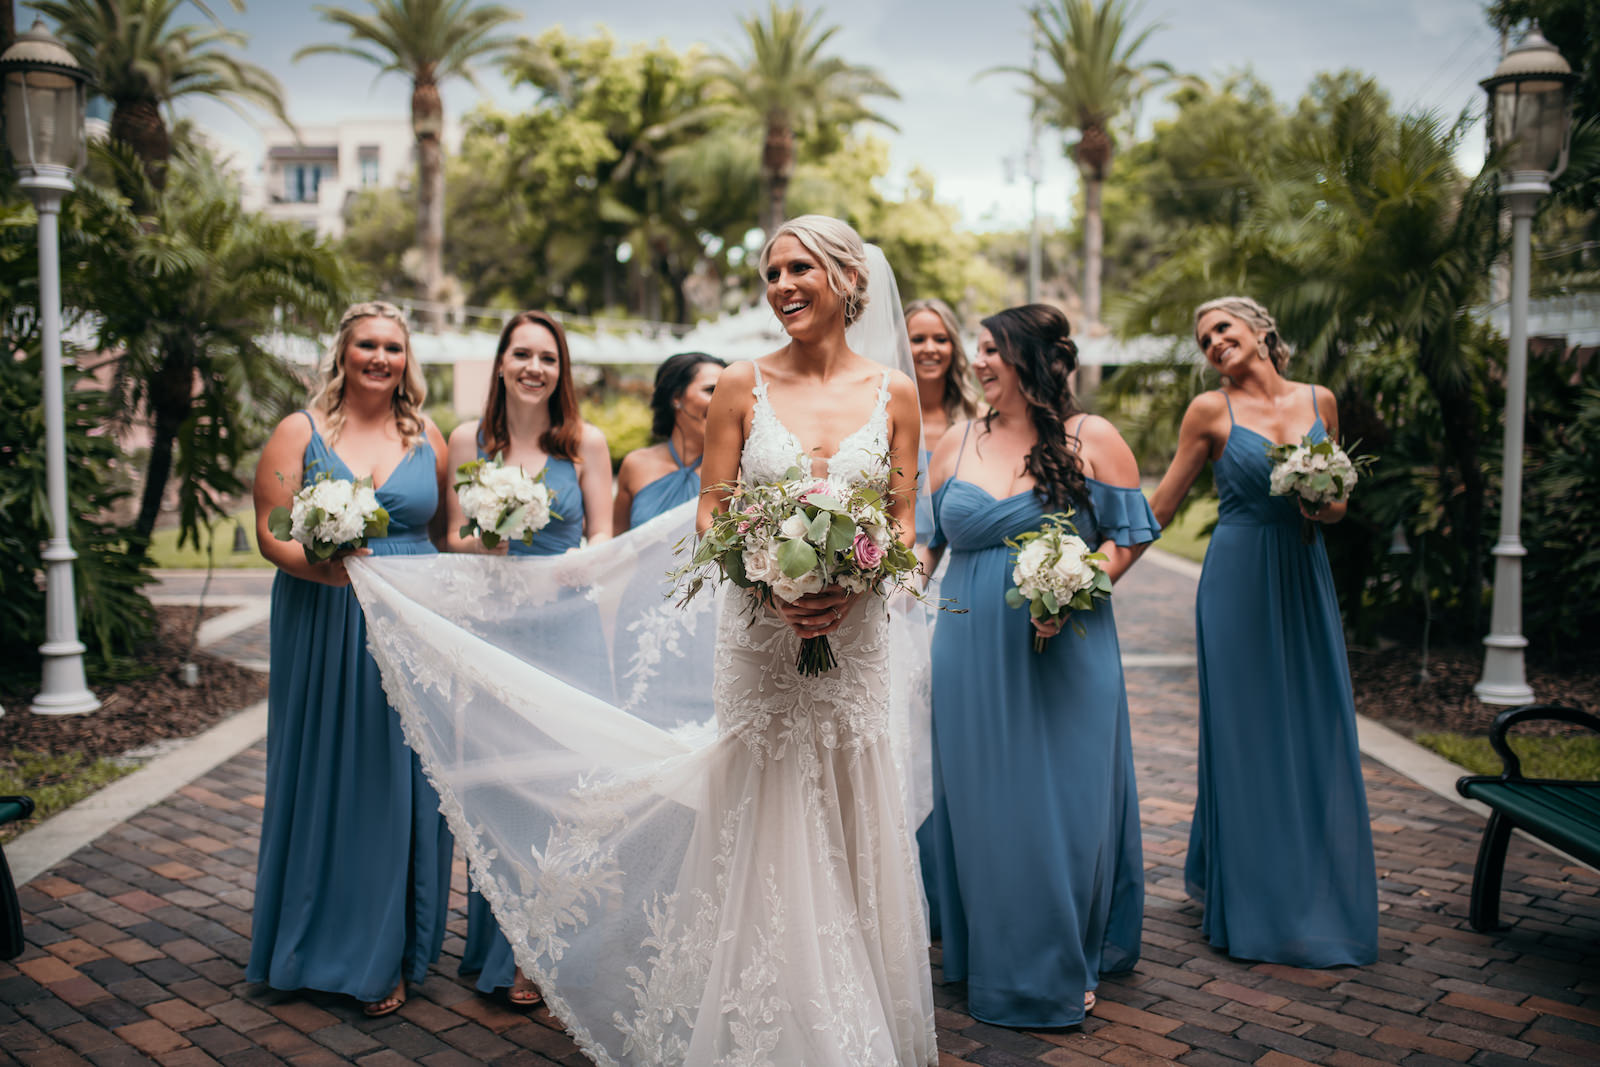 Tampa Bay Bride and Bridesmaids Walking Down Brick Street at The Vinoy Renaissance Hotel in Downtown St. Petersburg, Florida Bride Holding Romantic White, Pink and Ivory Floral Bouquet with Greenery, Bridesmaids in Mix and Match Dusty Blue Long Dresses